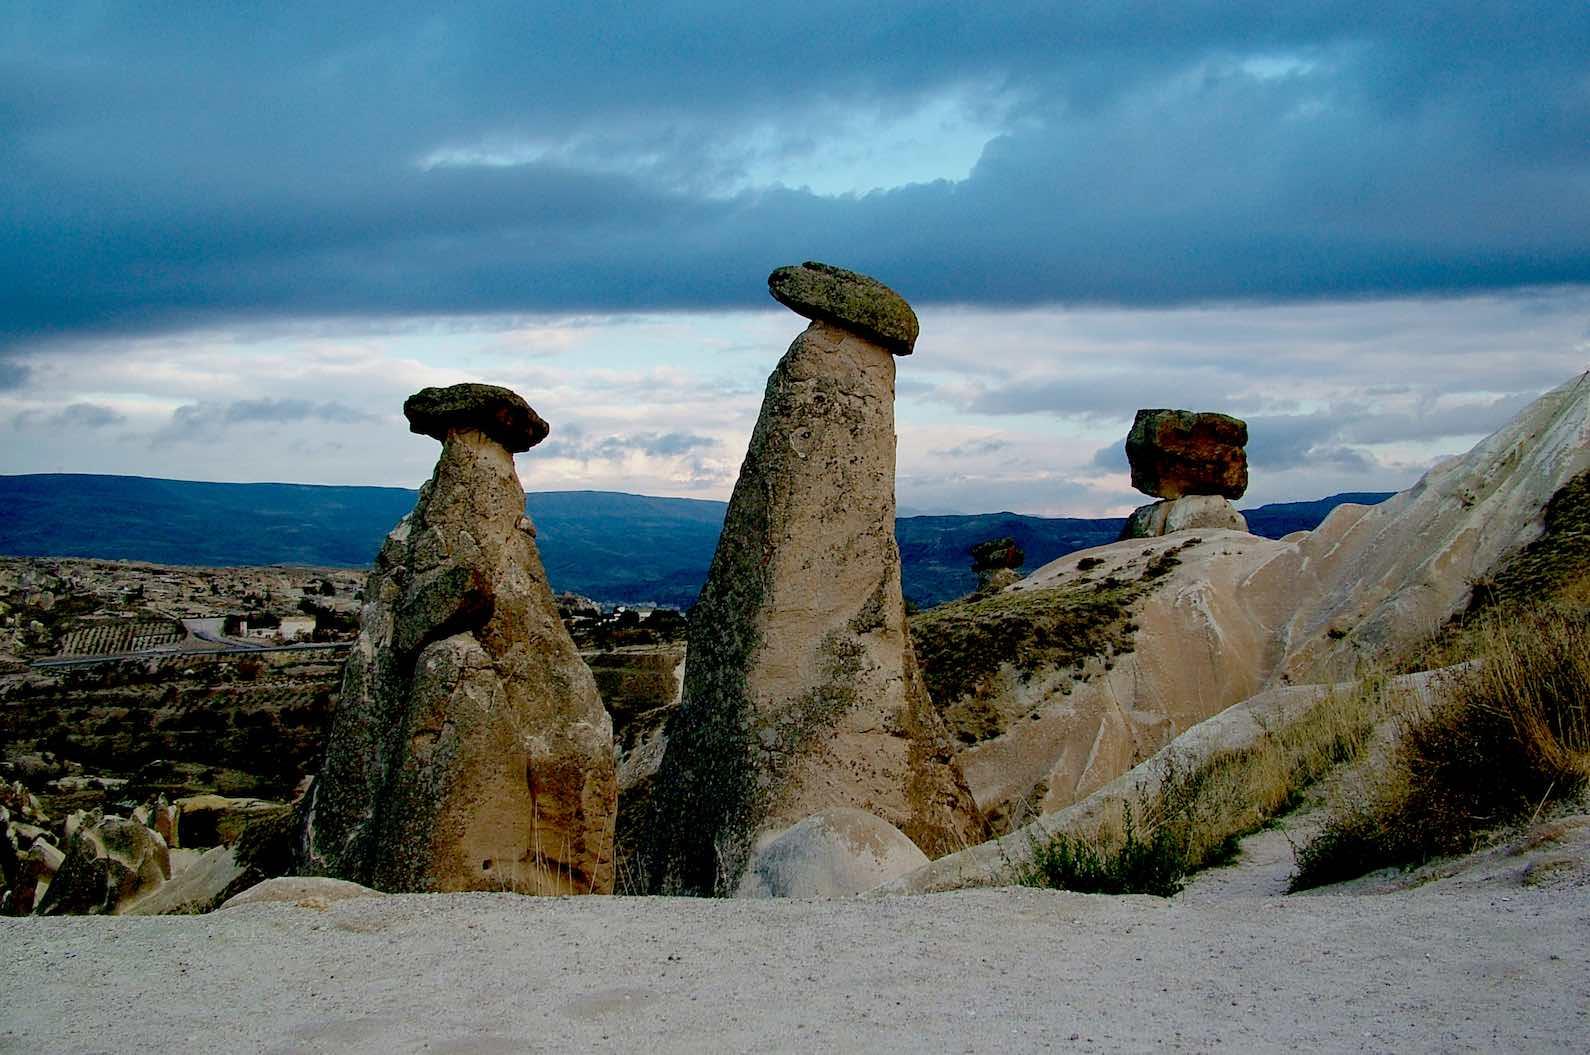 Fairy chimneys are tall, slim rocks capped by boulders that are created by erosion. 